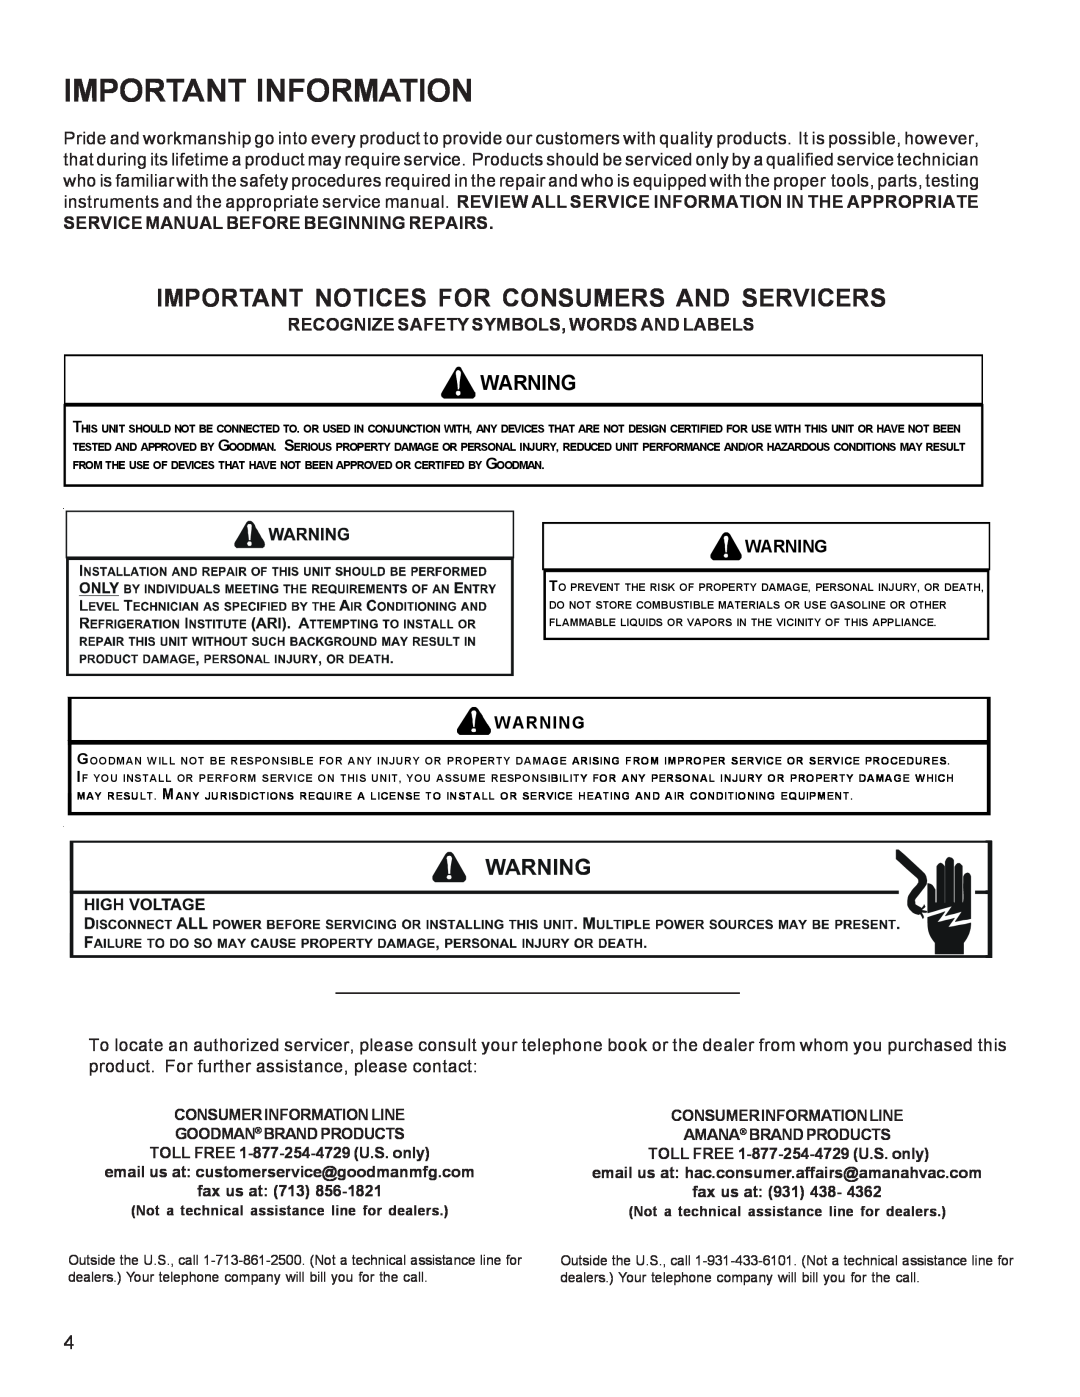 Goodman Mfg R-410A manual Important Information, Important Notices For Consumers And Servicers 